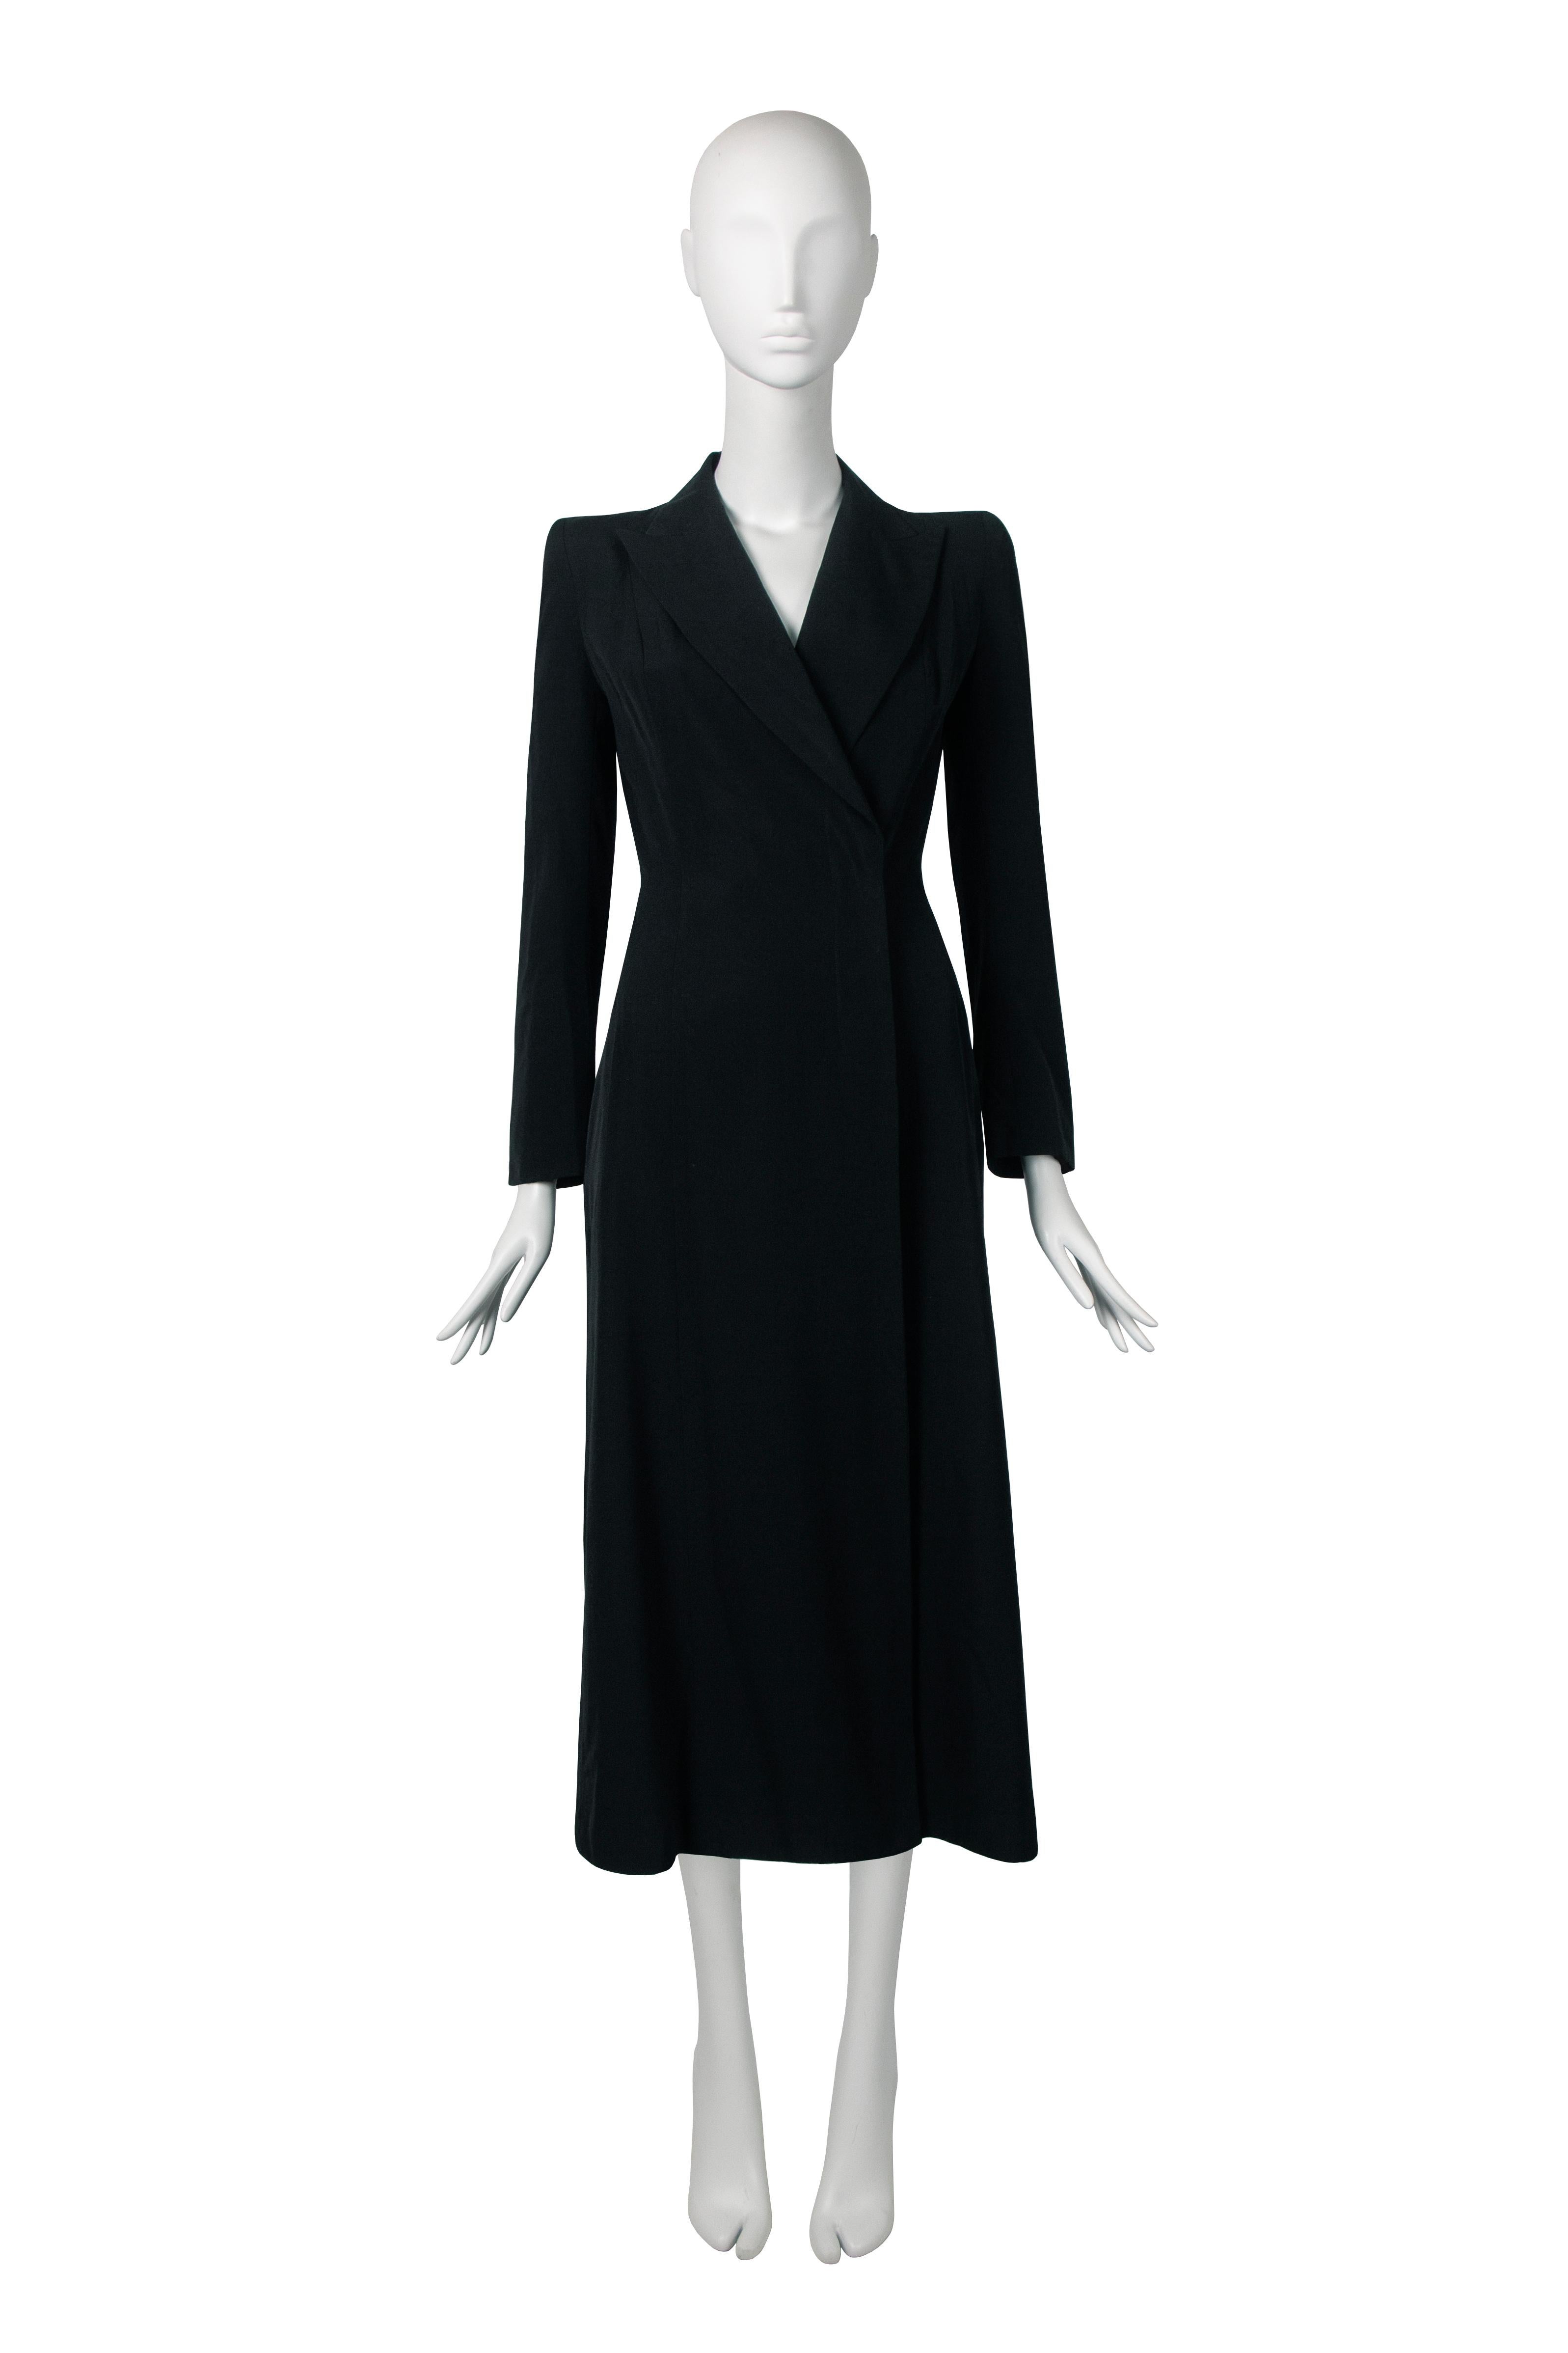 A John Galliano wool coat, spring-summer 1996 ‘L’École de Danse’. This sophisticated calf length coat is crafted from black wool gabardine, which gives it a luxurious feel and a sleek look.

The peak lapel and strong shoulders are standout features